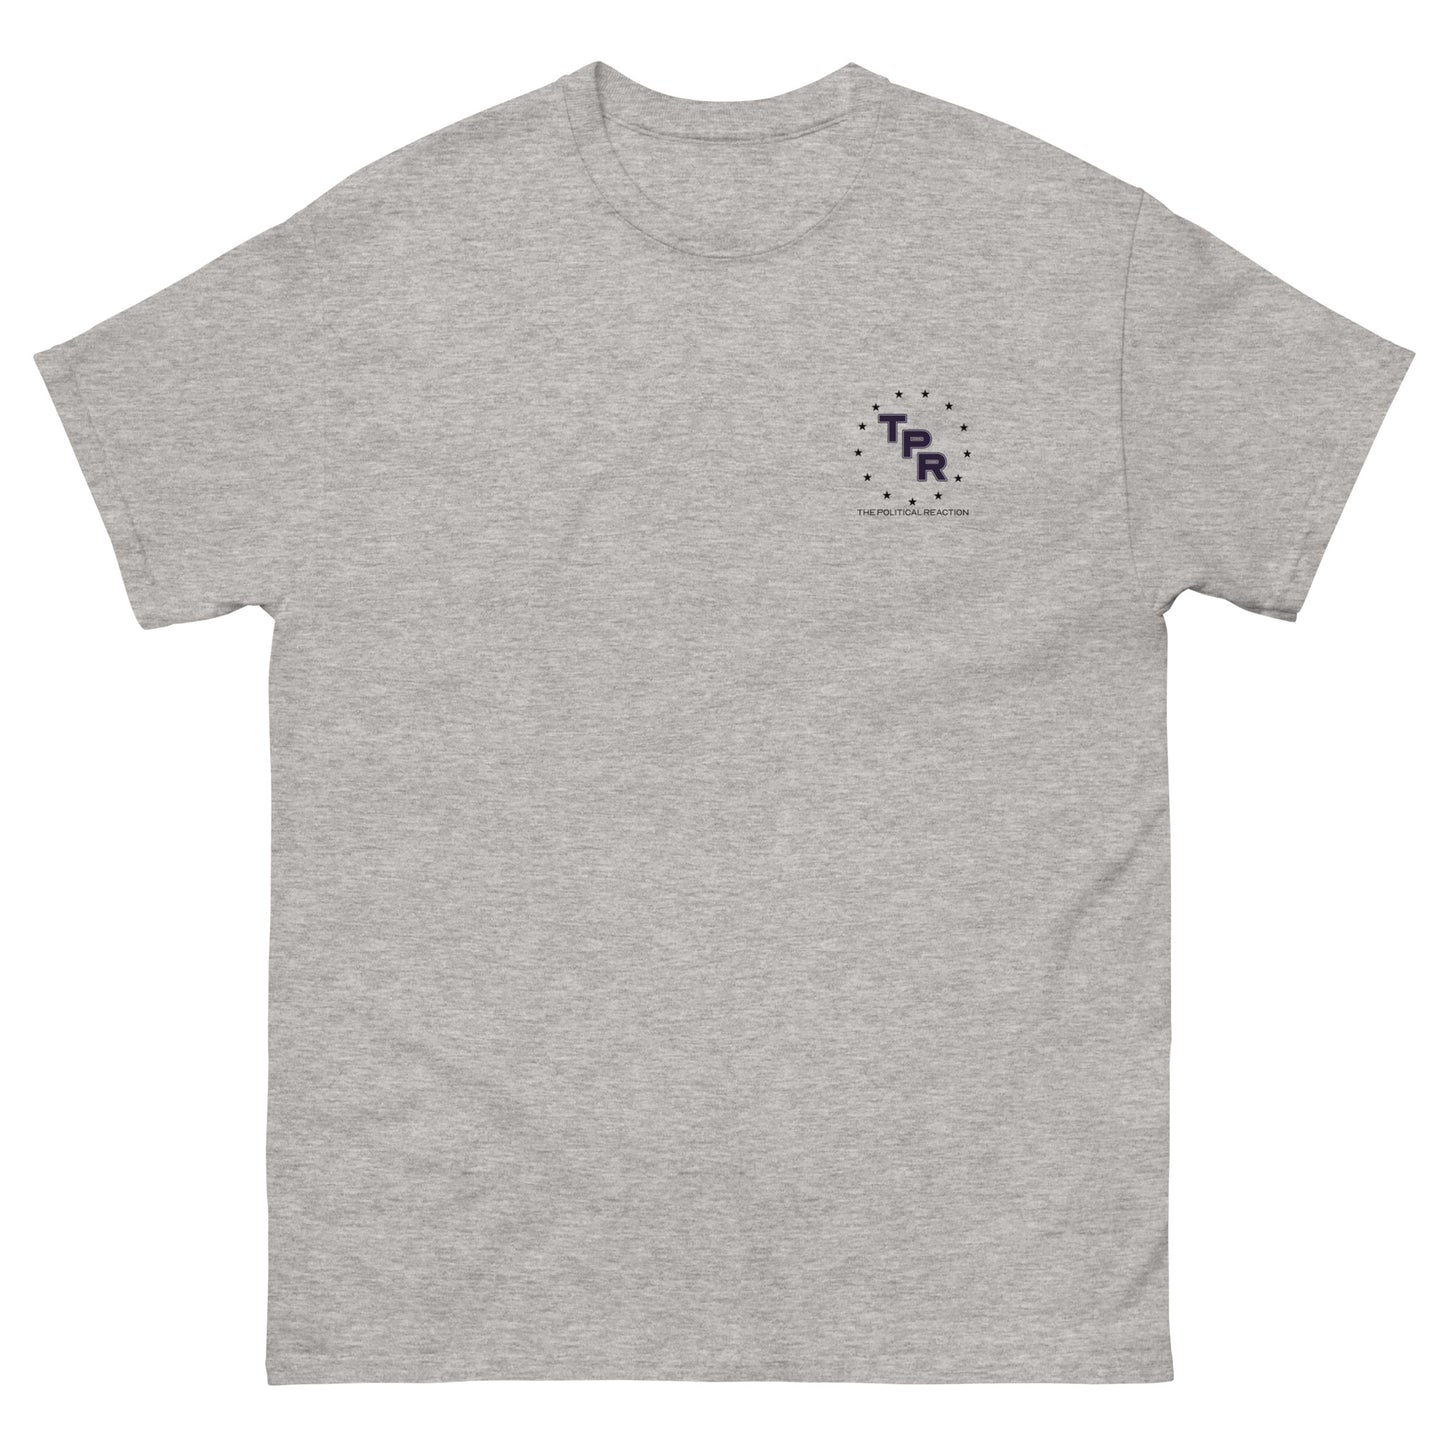 TPR-Classic-Unisex-Tee-Grey-front